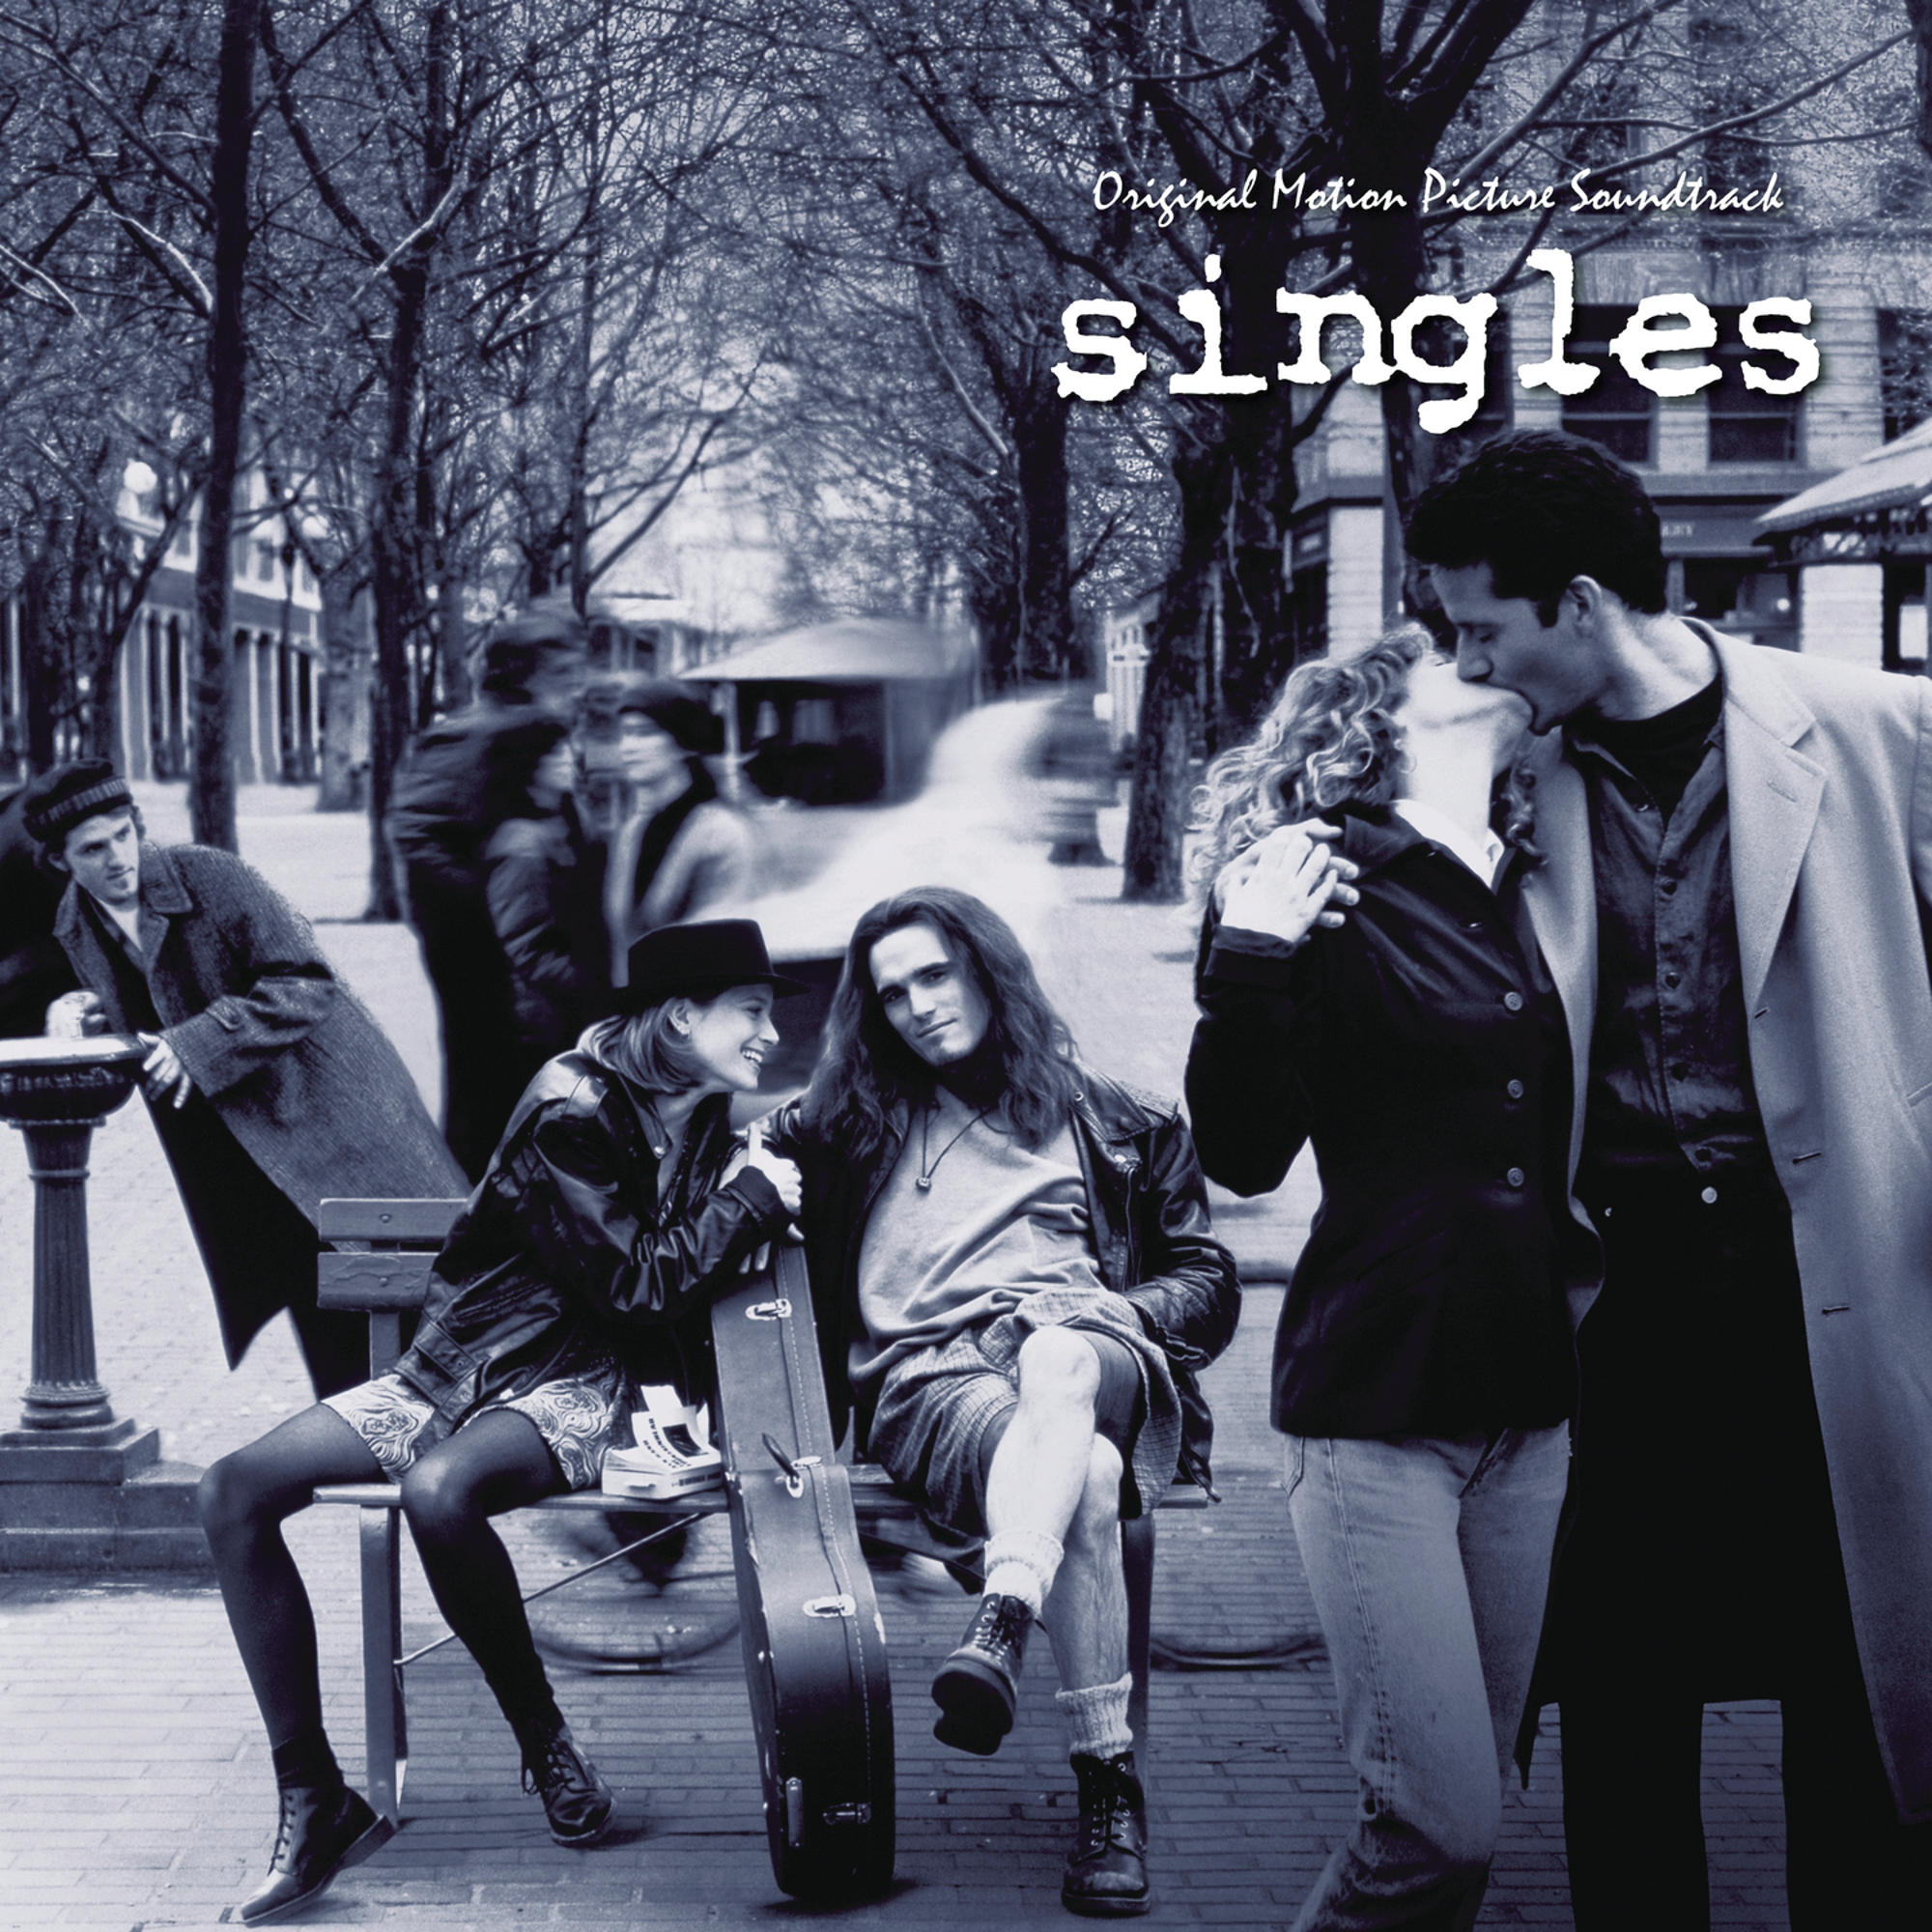 VARIOUS - Singles/OST (Deluxe Edition) - (CD)